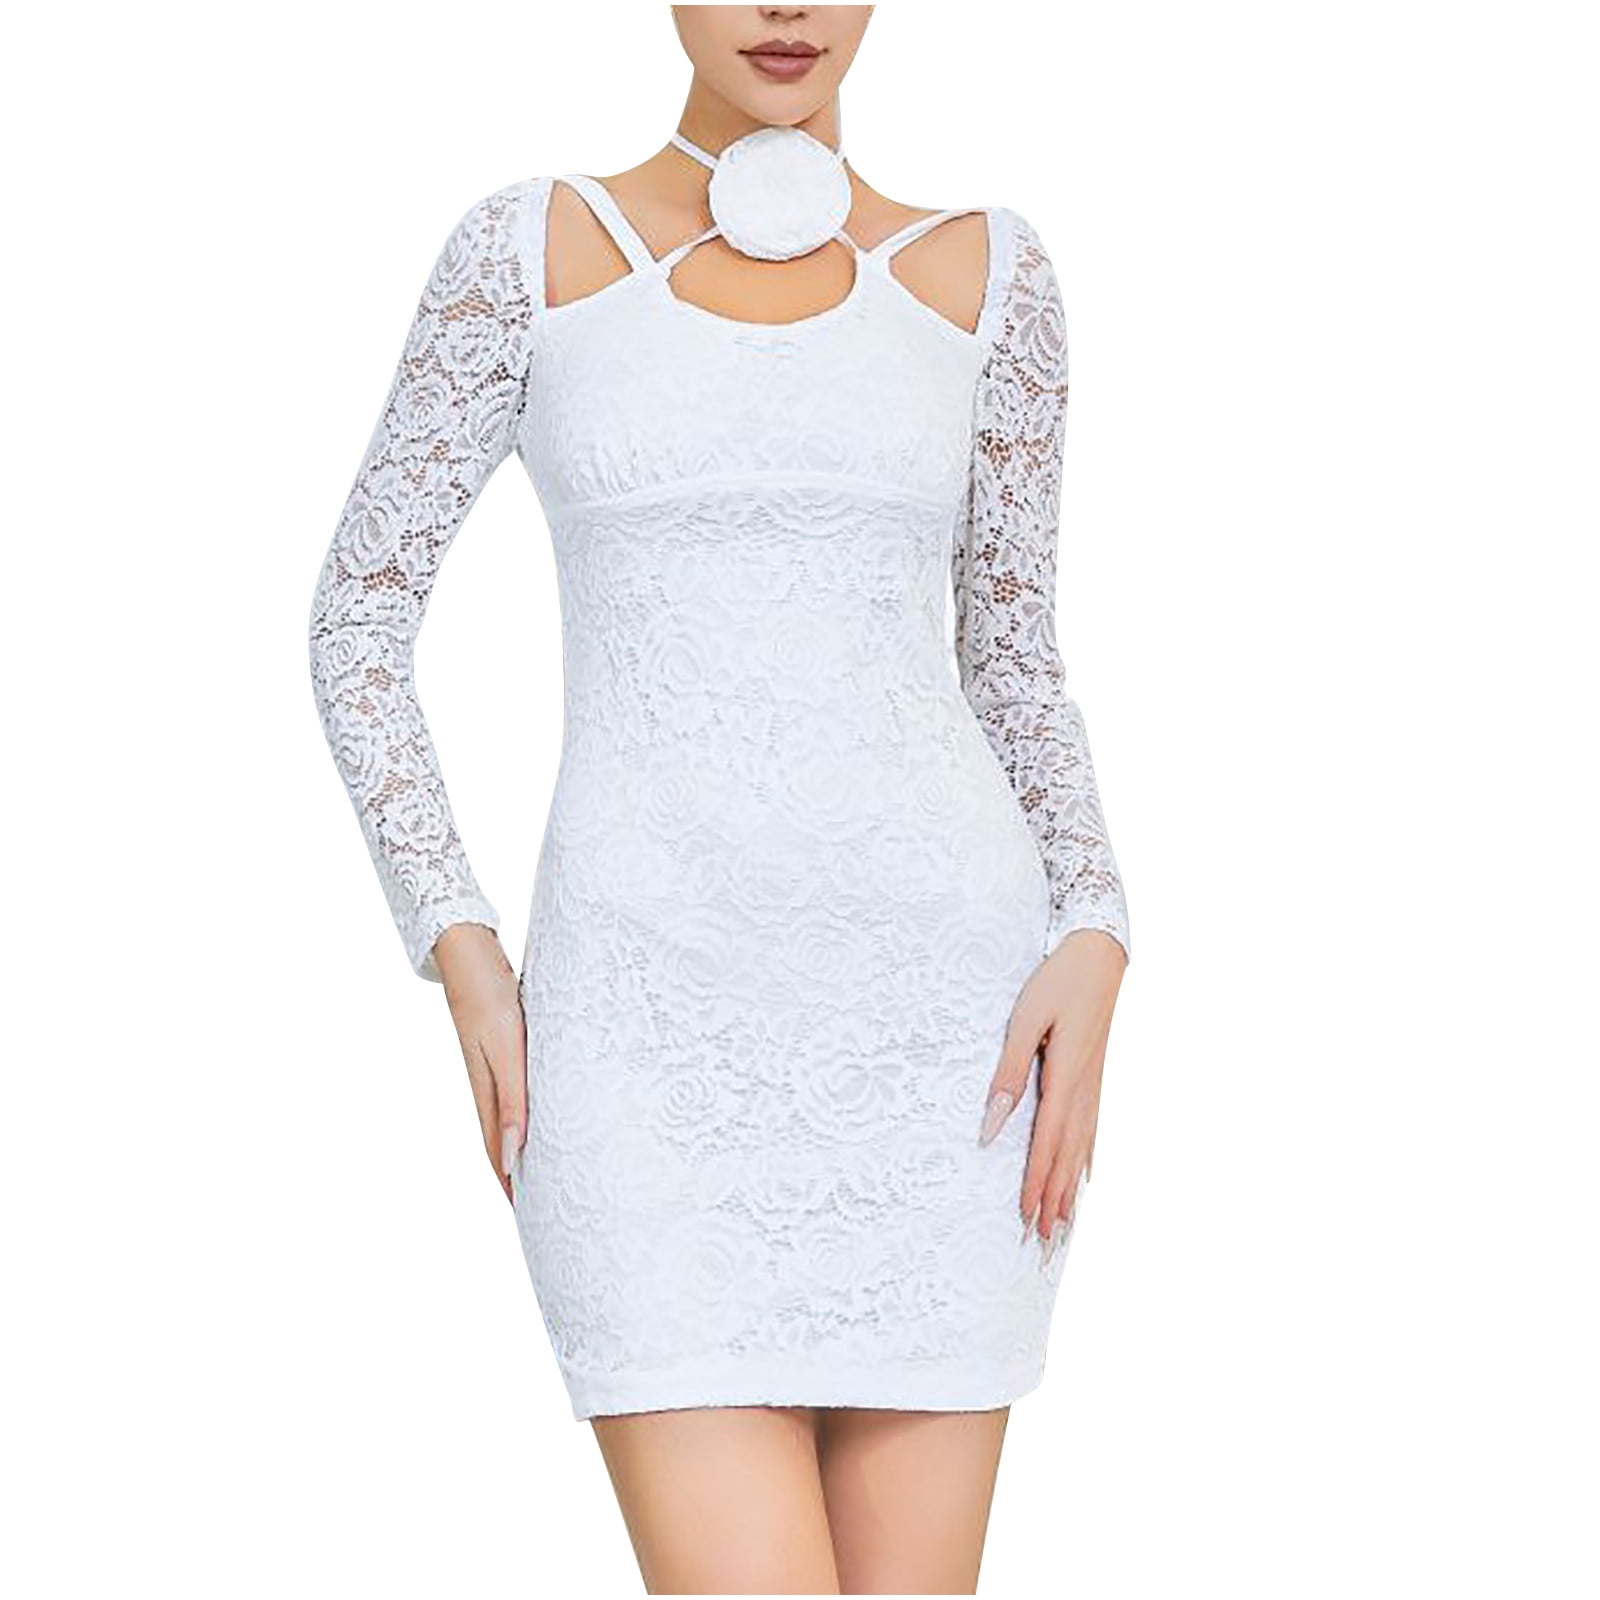 Dianli Womens Dresses Long Sleeve Women's Cute Hollow Out Lace ...